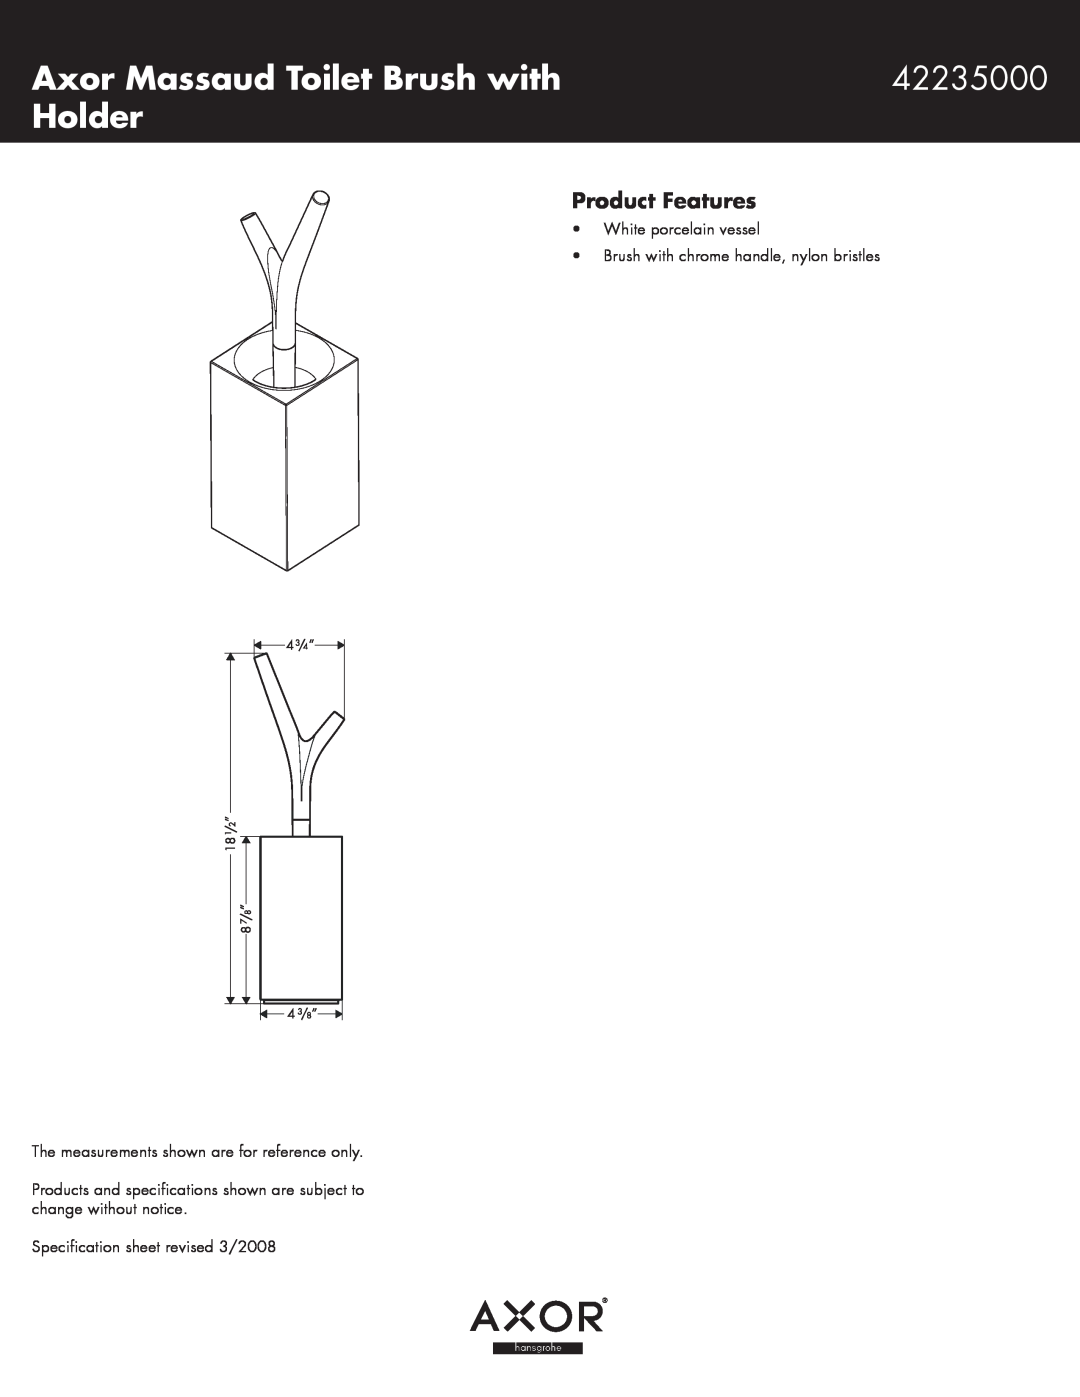 Axor 42235000 specifications Axor Massaud Toilet Brush with, Holder, Product Features, Specification sheet revised 3/2008 